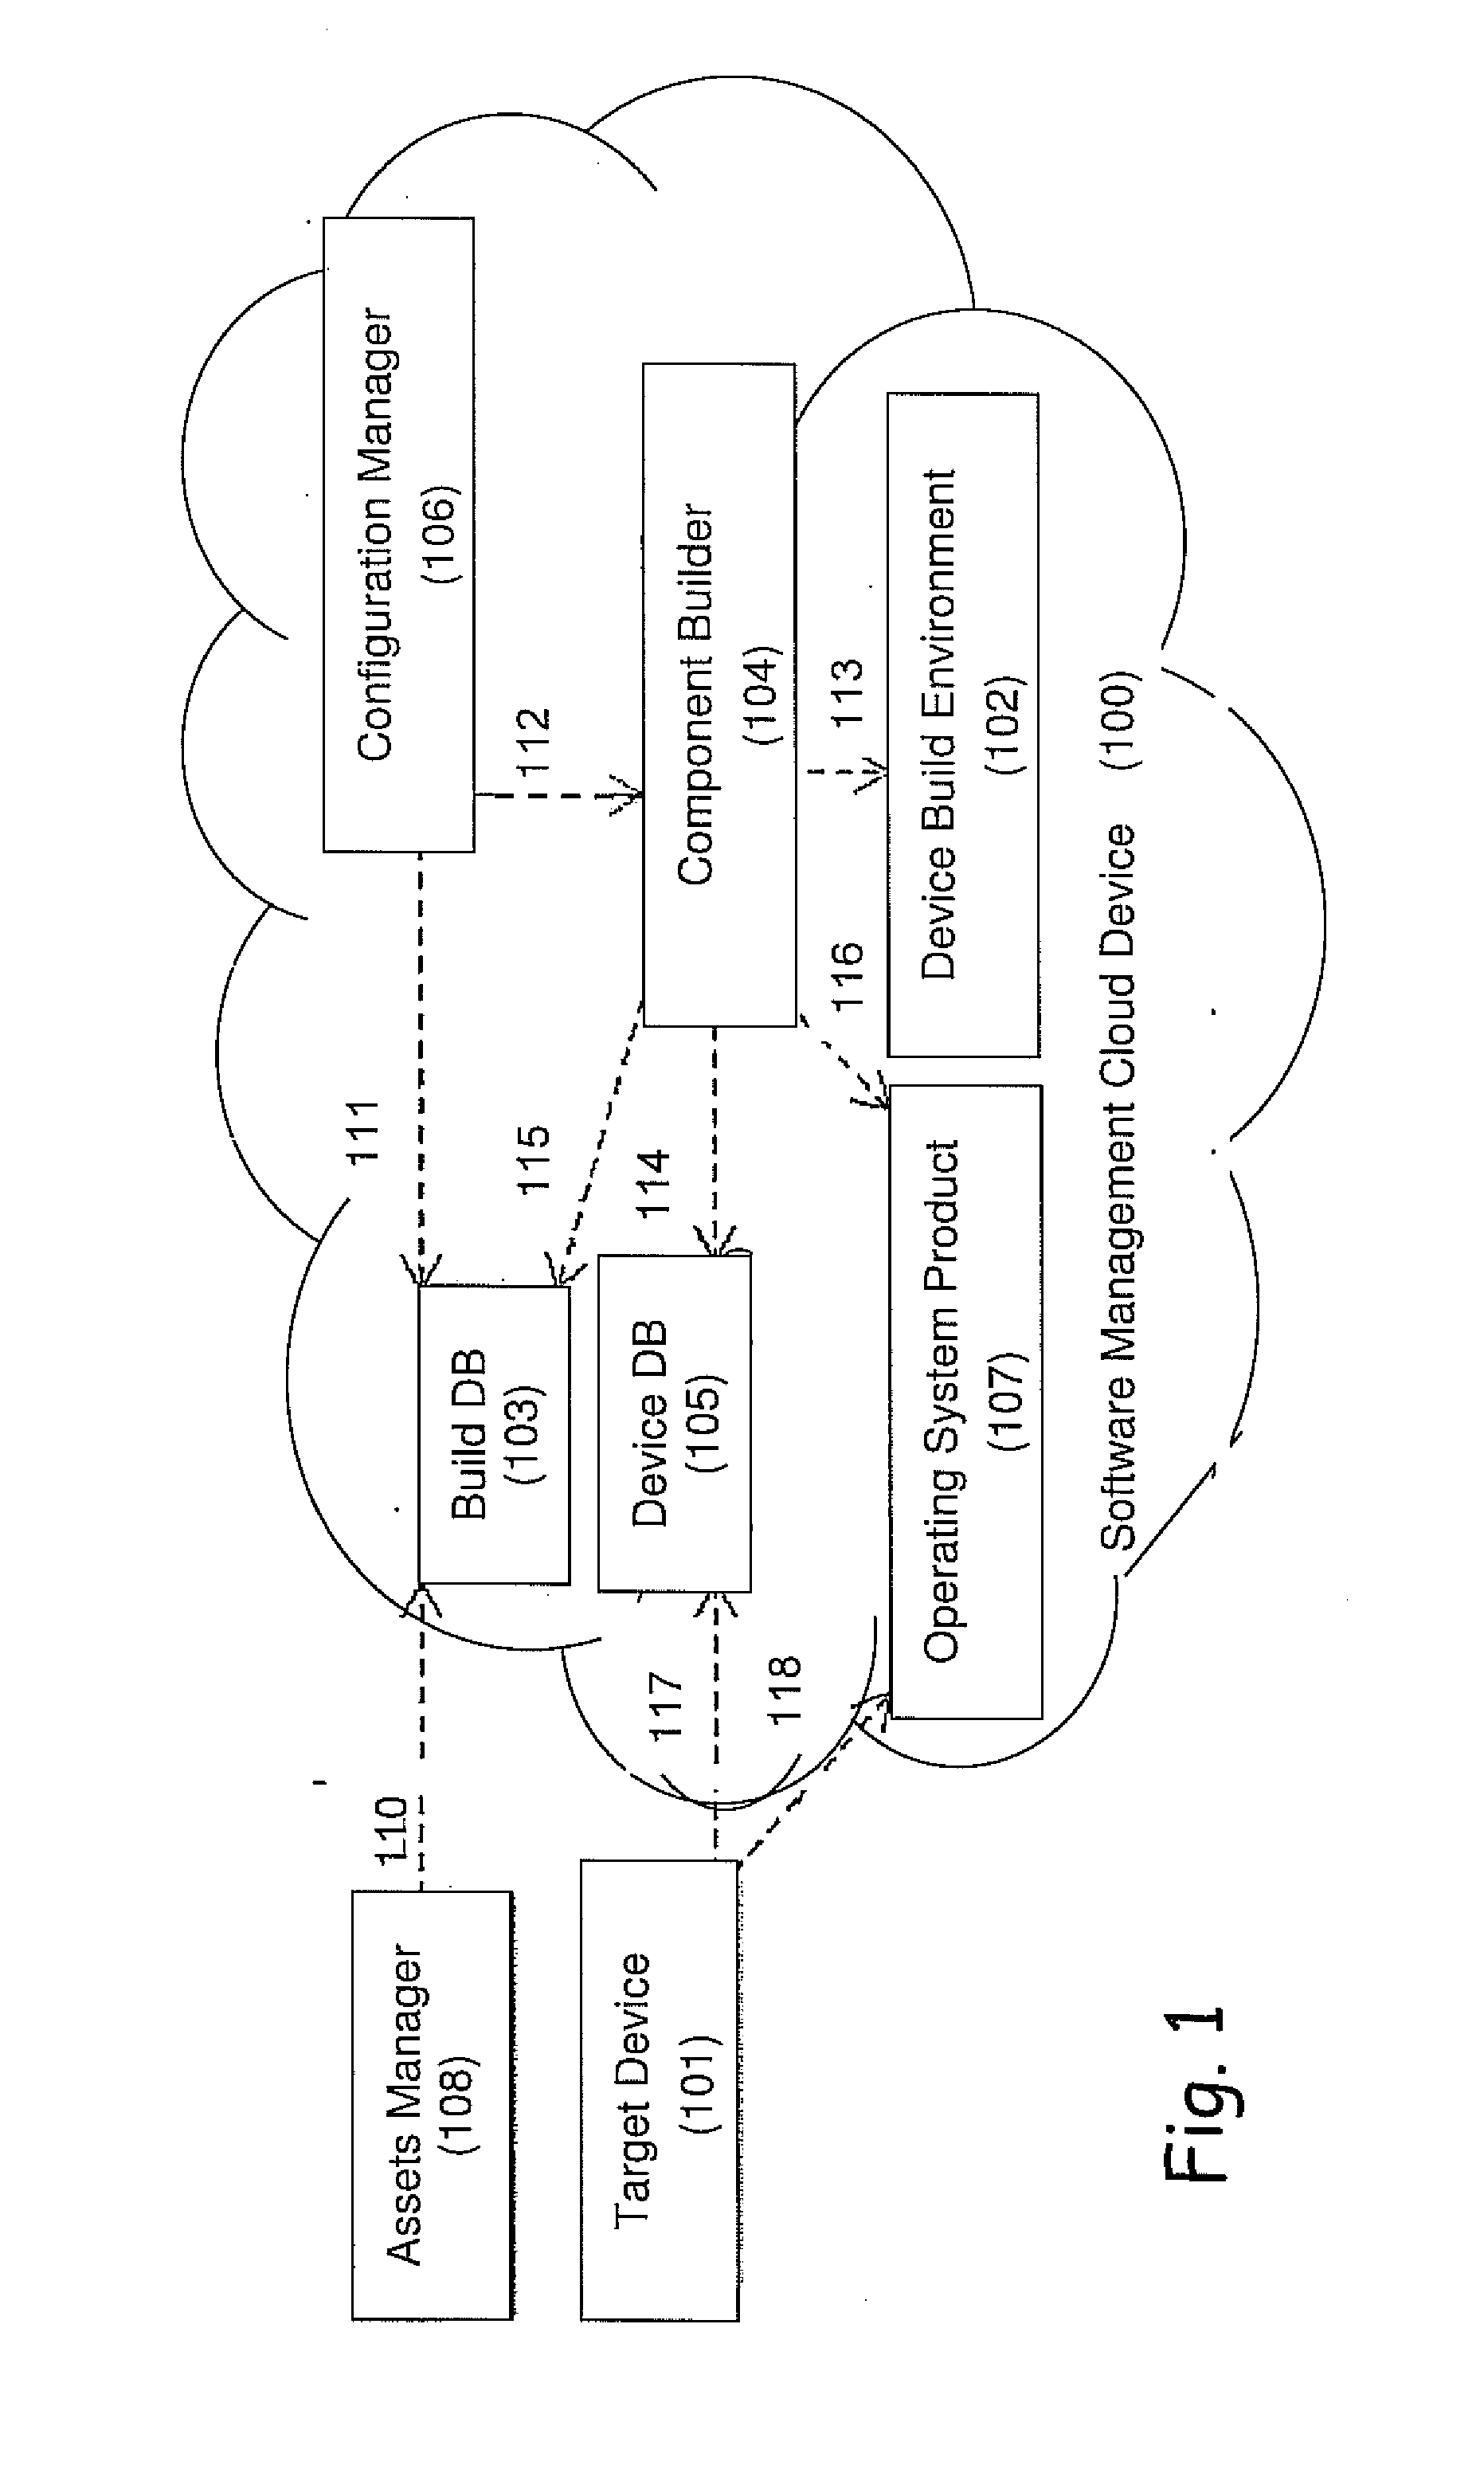 System and method for detection and prevention of host intrusions and malicious payloads